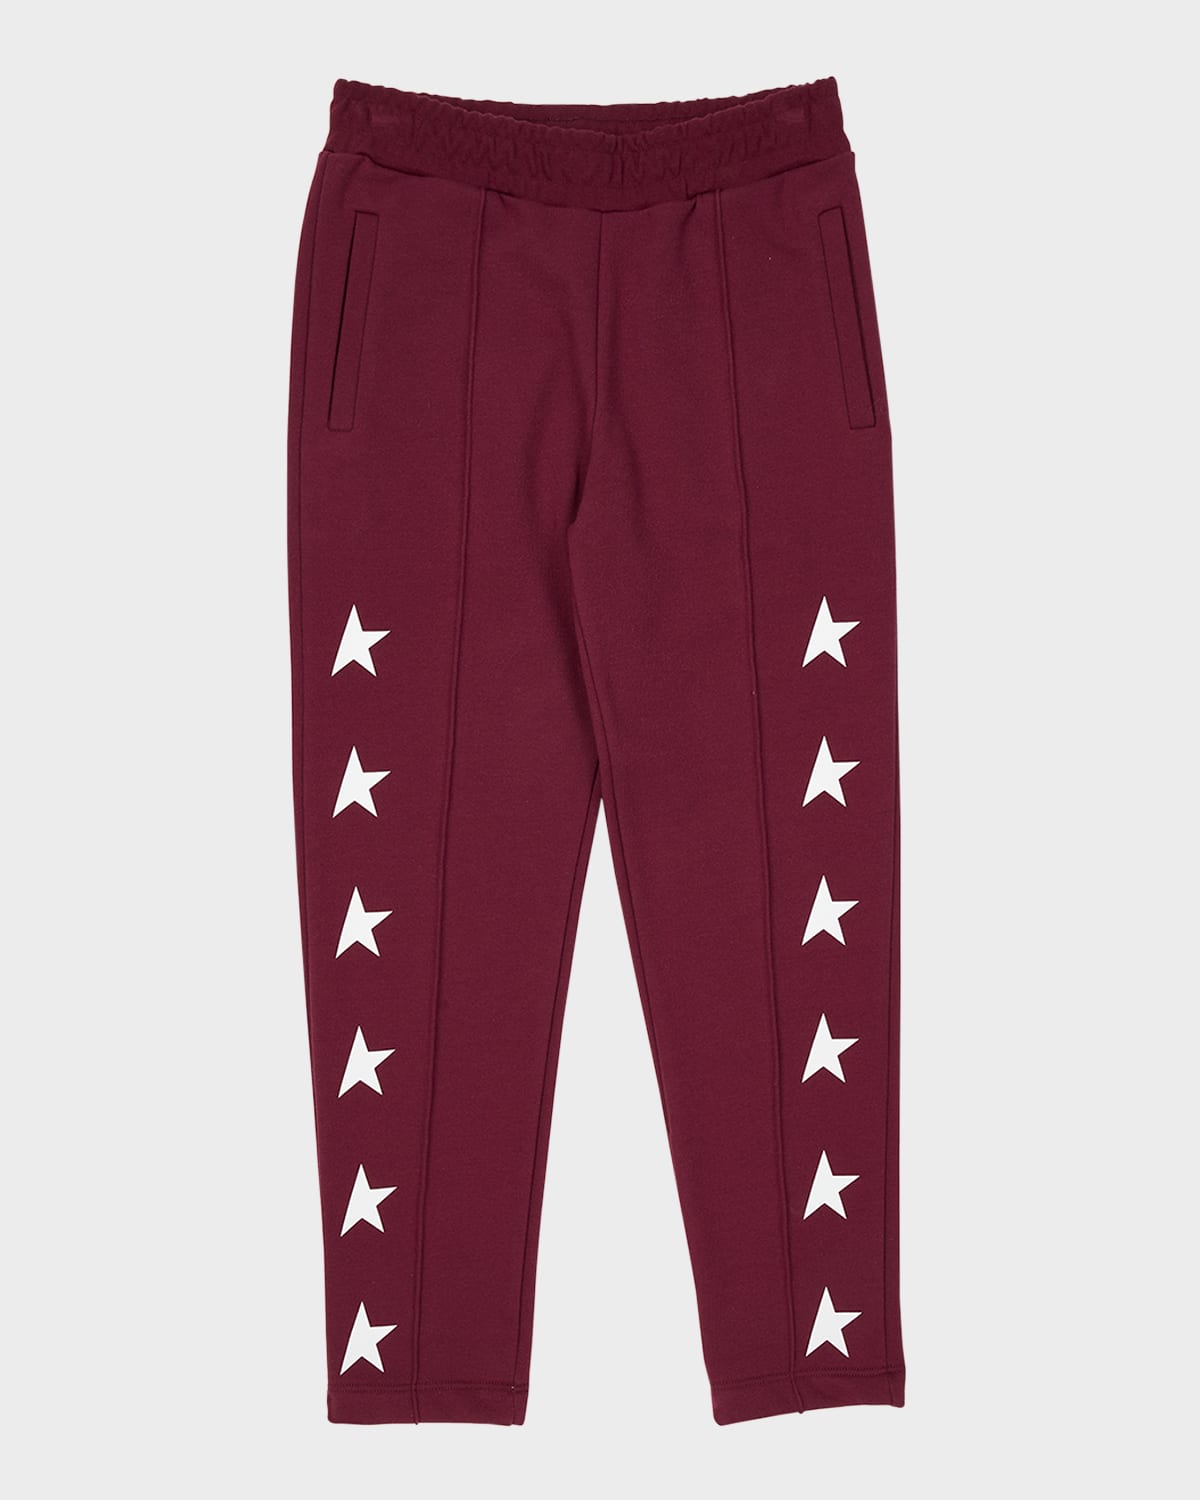 GOLDEN GOOSE BOY'S STAR TAPERED JOGGERS